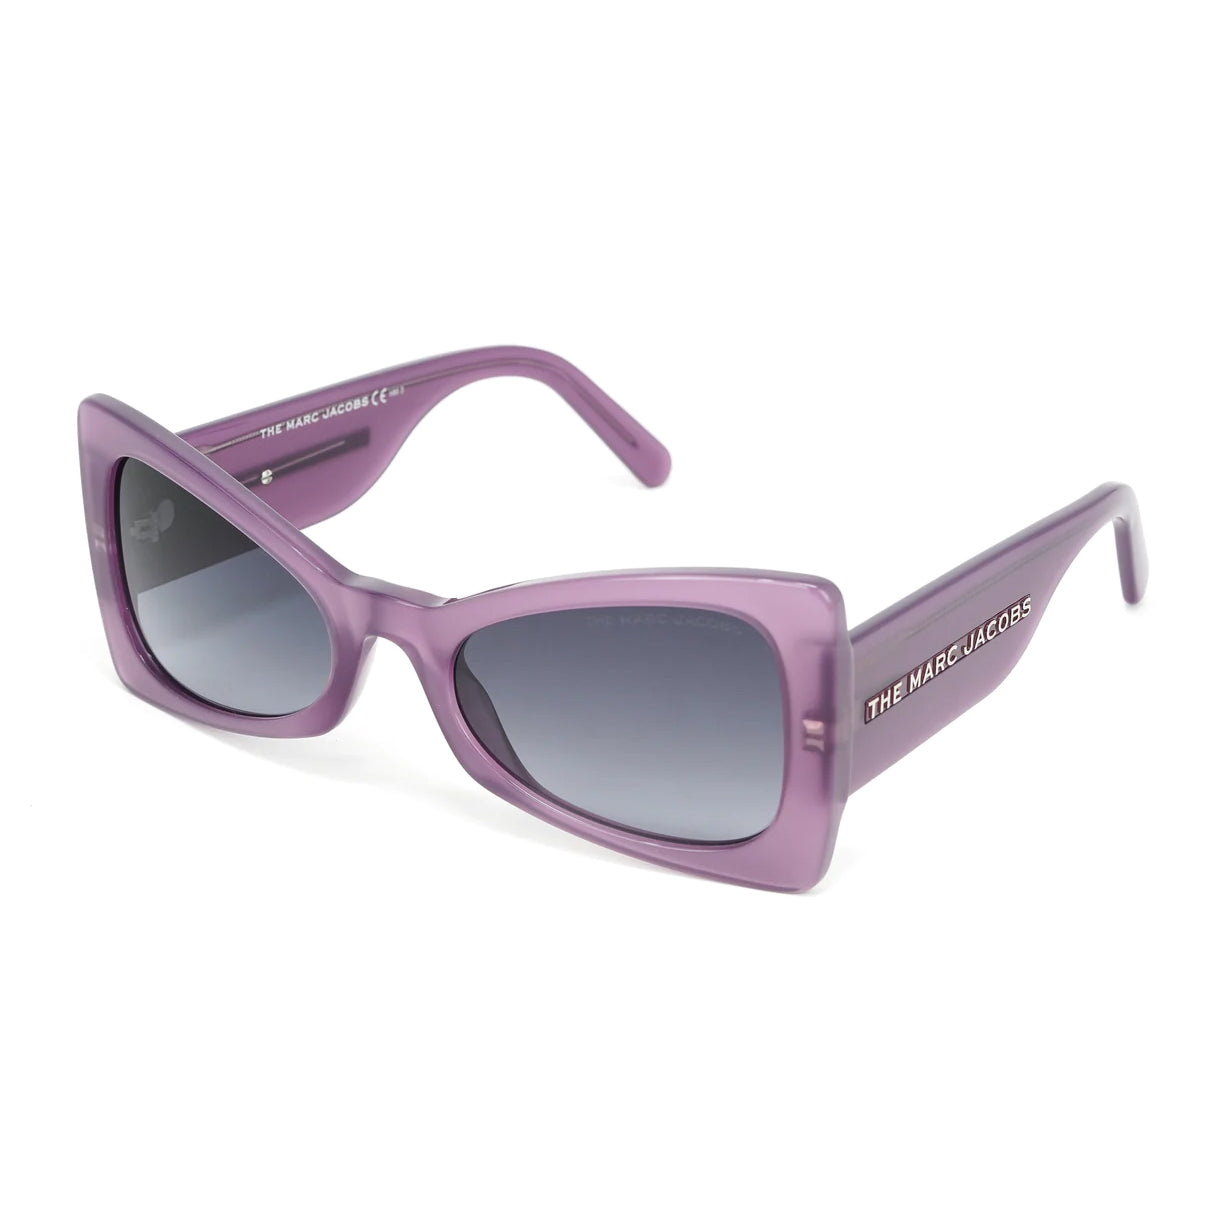 Marc Jacobs Women's Sunglasses Angular Butterfly Violet MARC 553/S 789